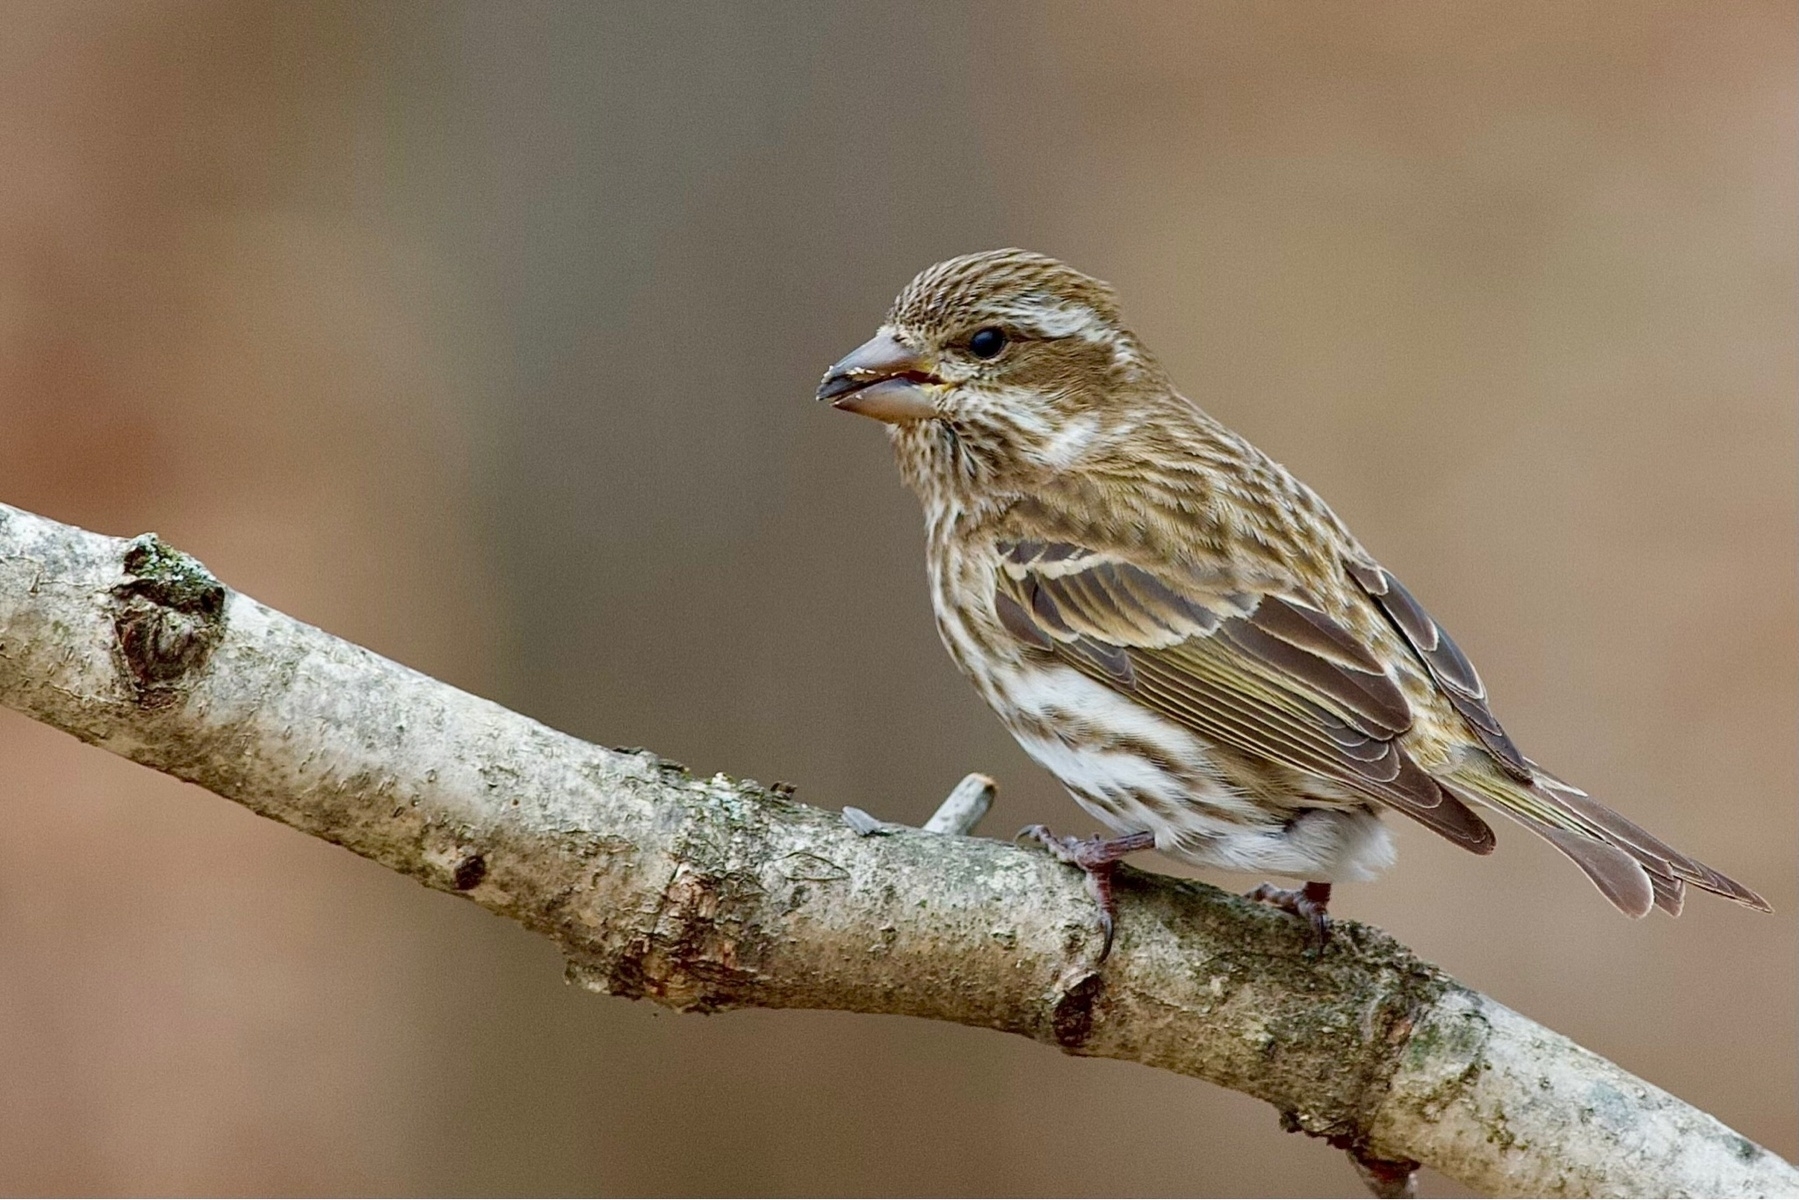 A small brown and white colored bird is perched on a branch  set  against a blurred winter background